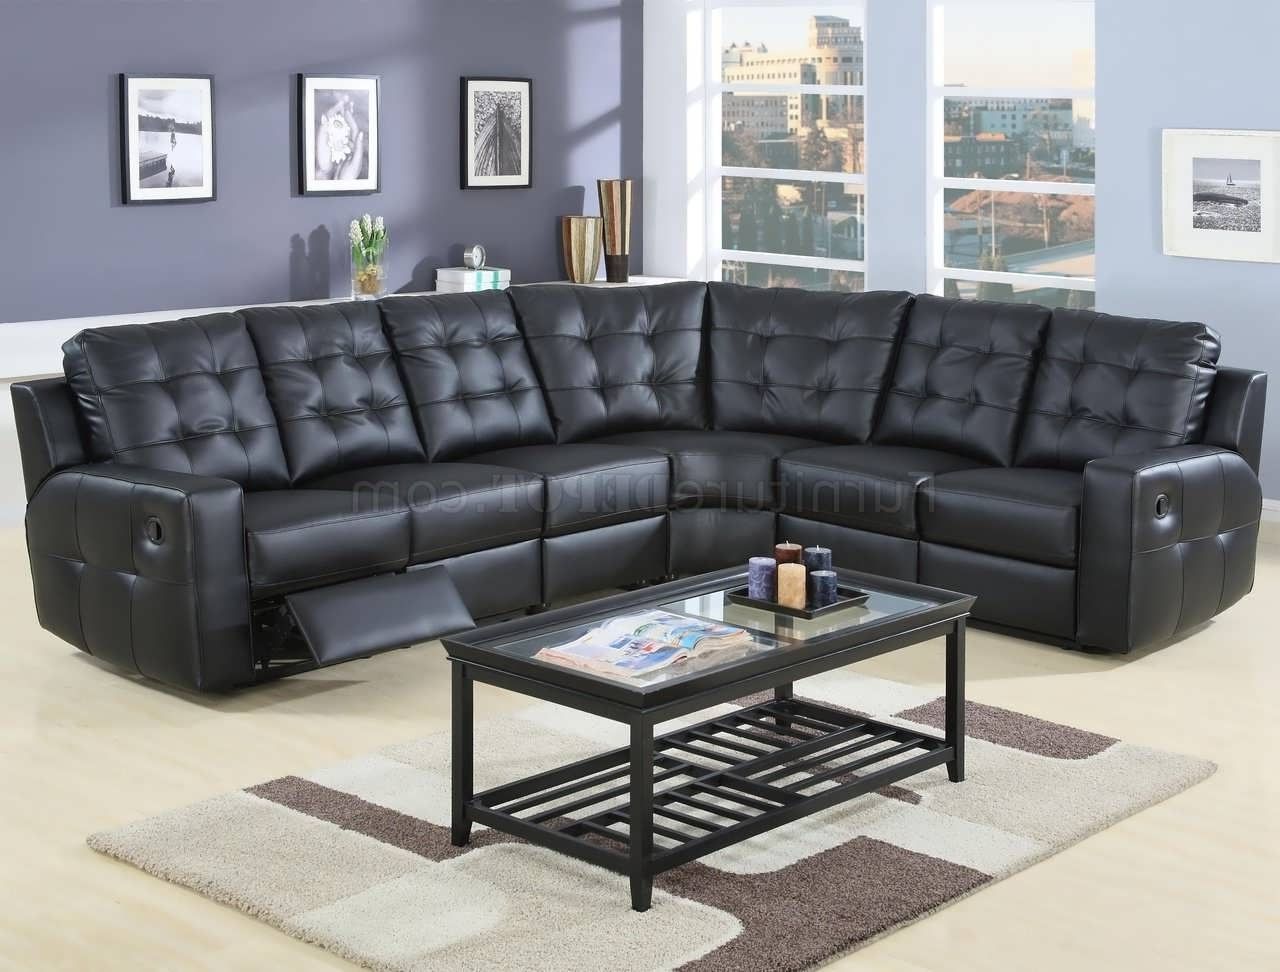 Favorite Black Leather Sectionals With Chaise Inside Sofa : Sectional Couches For Sale Small Black Leather Sectional (View 9 of 15)